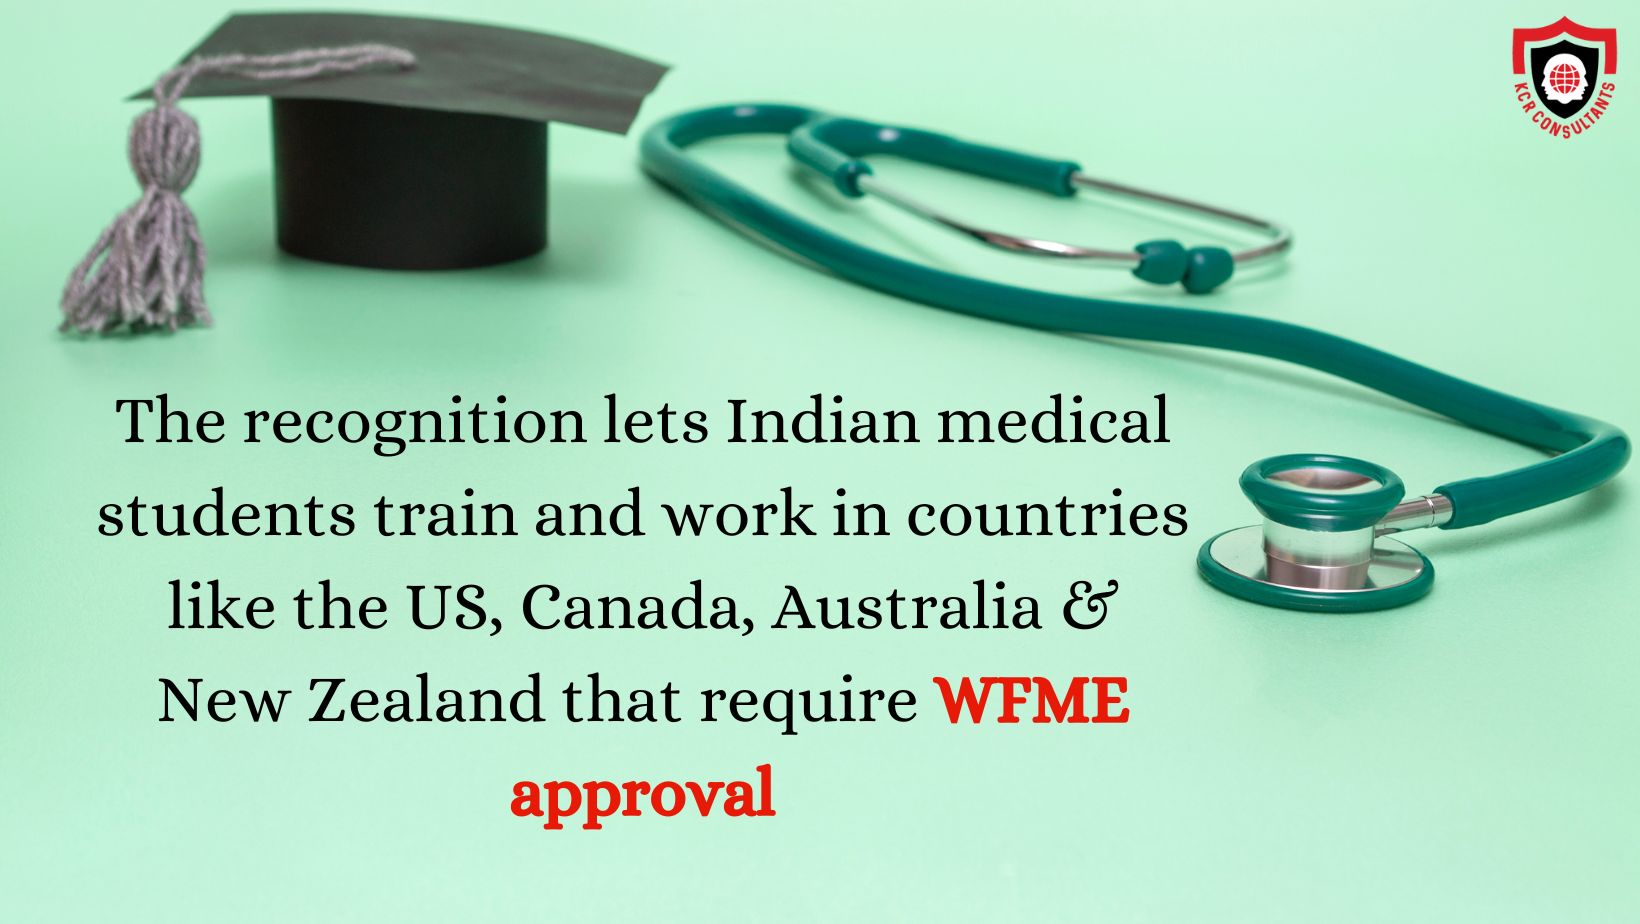 National Medical Commission (NMC) recognition by WFME - KCR Consultants - International recognition